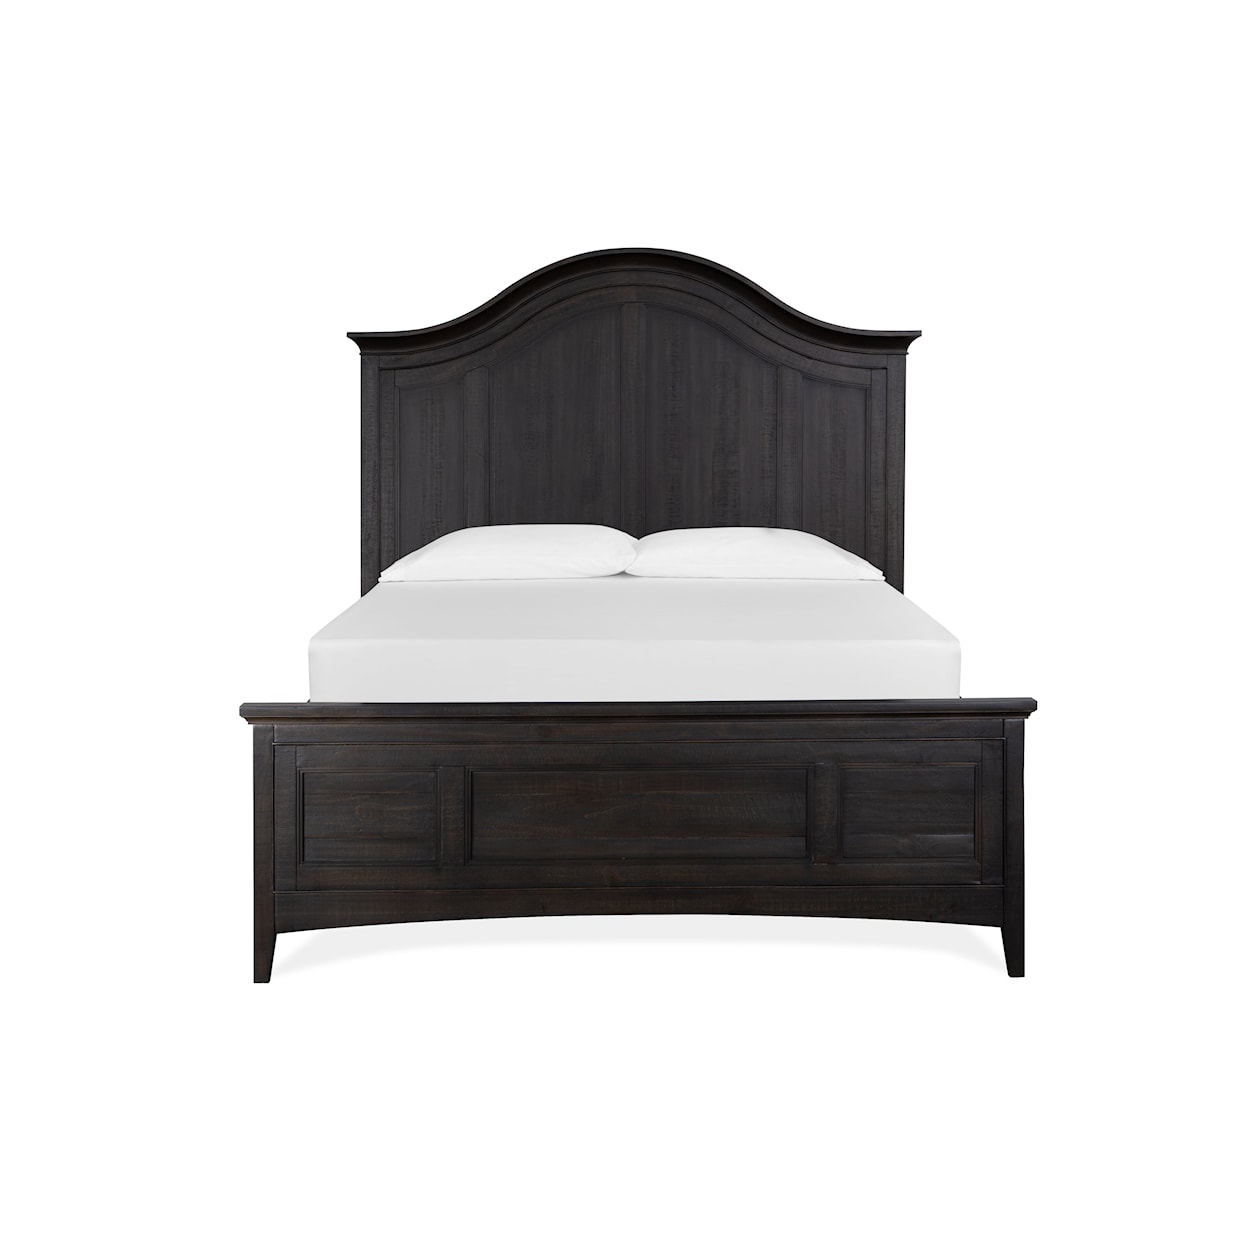 Magnussen Home Westley Falls Bedroom California King Arched Storage Bed